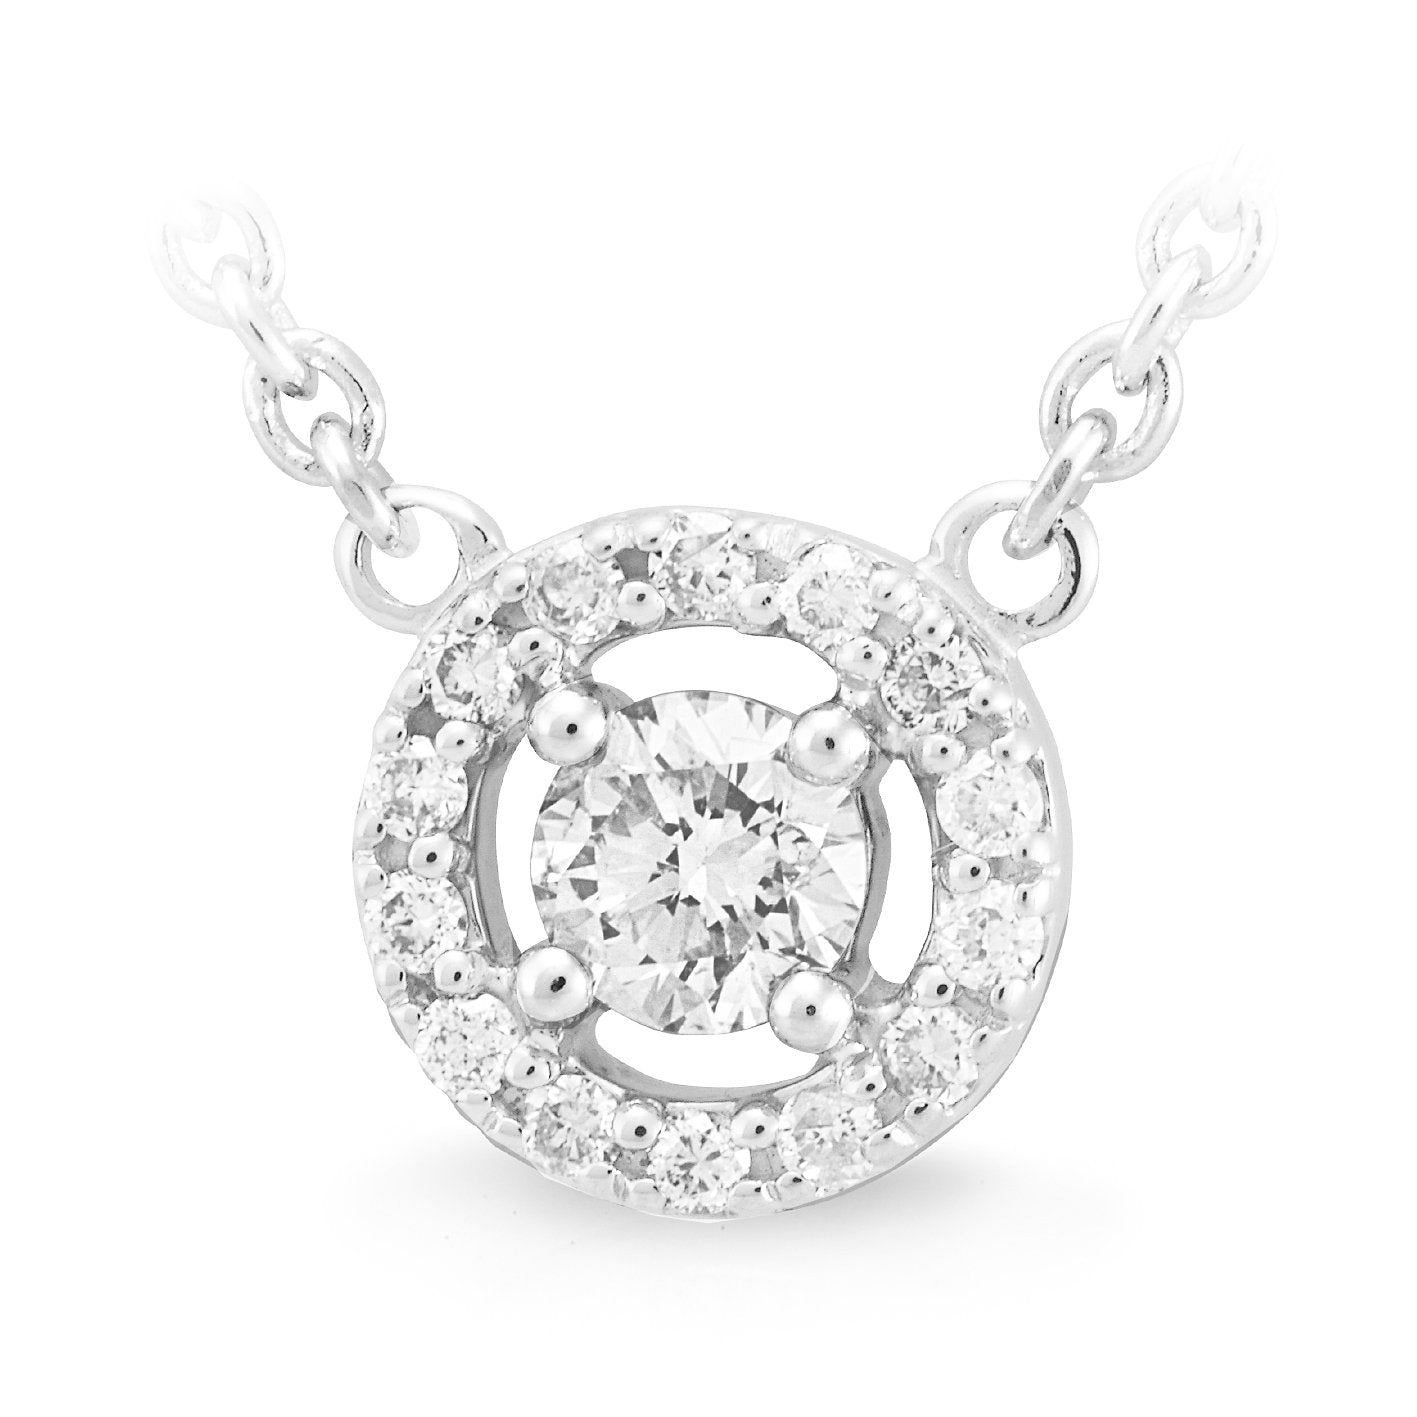 Diamond Claw/Bead Set Necklet in 9ct White Gold